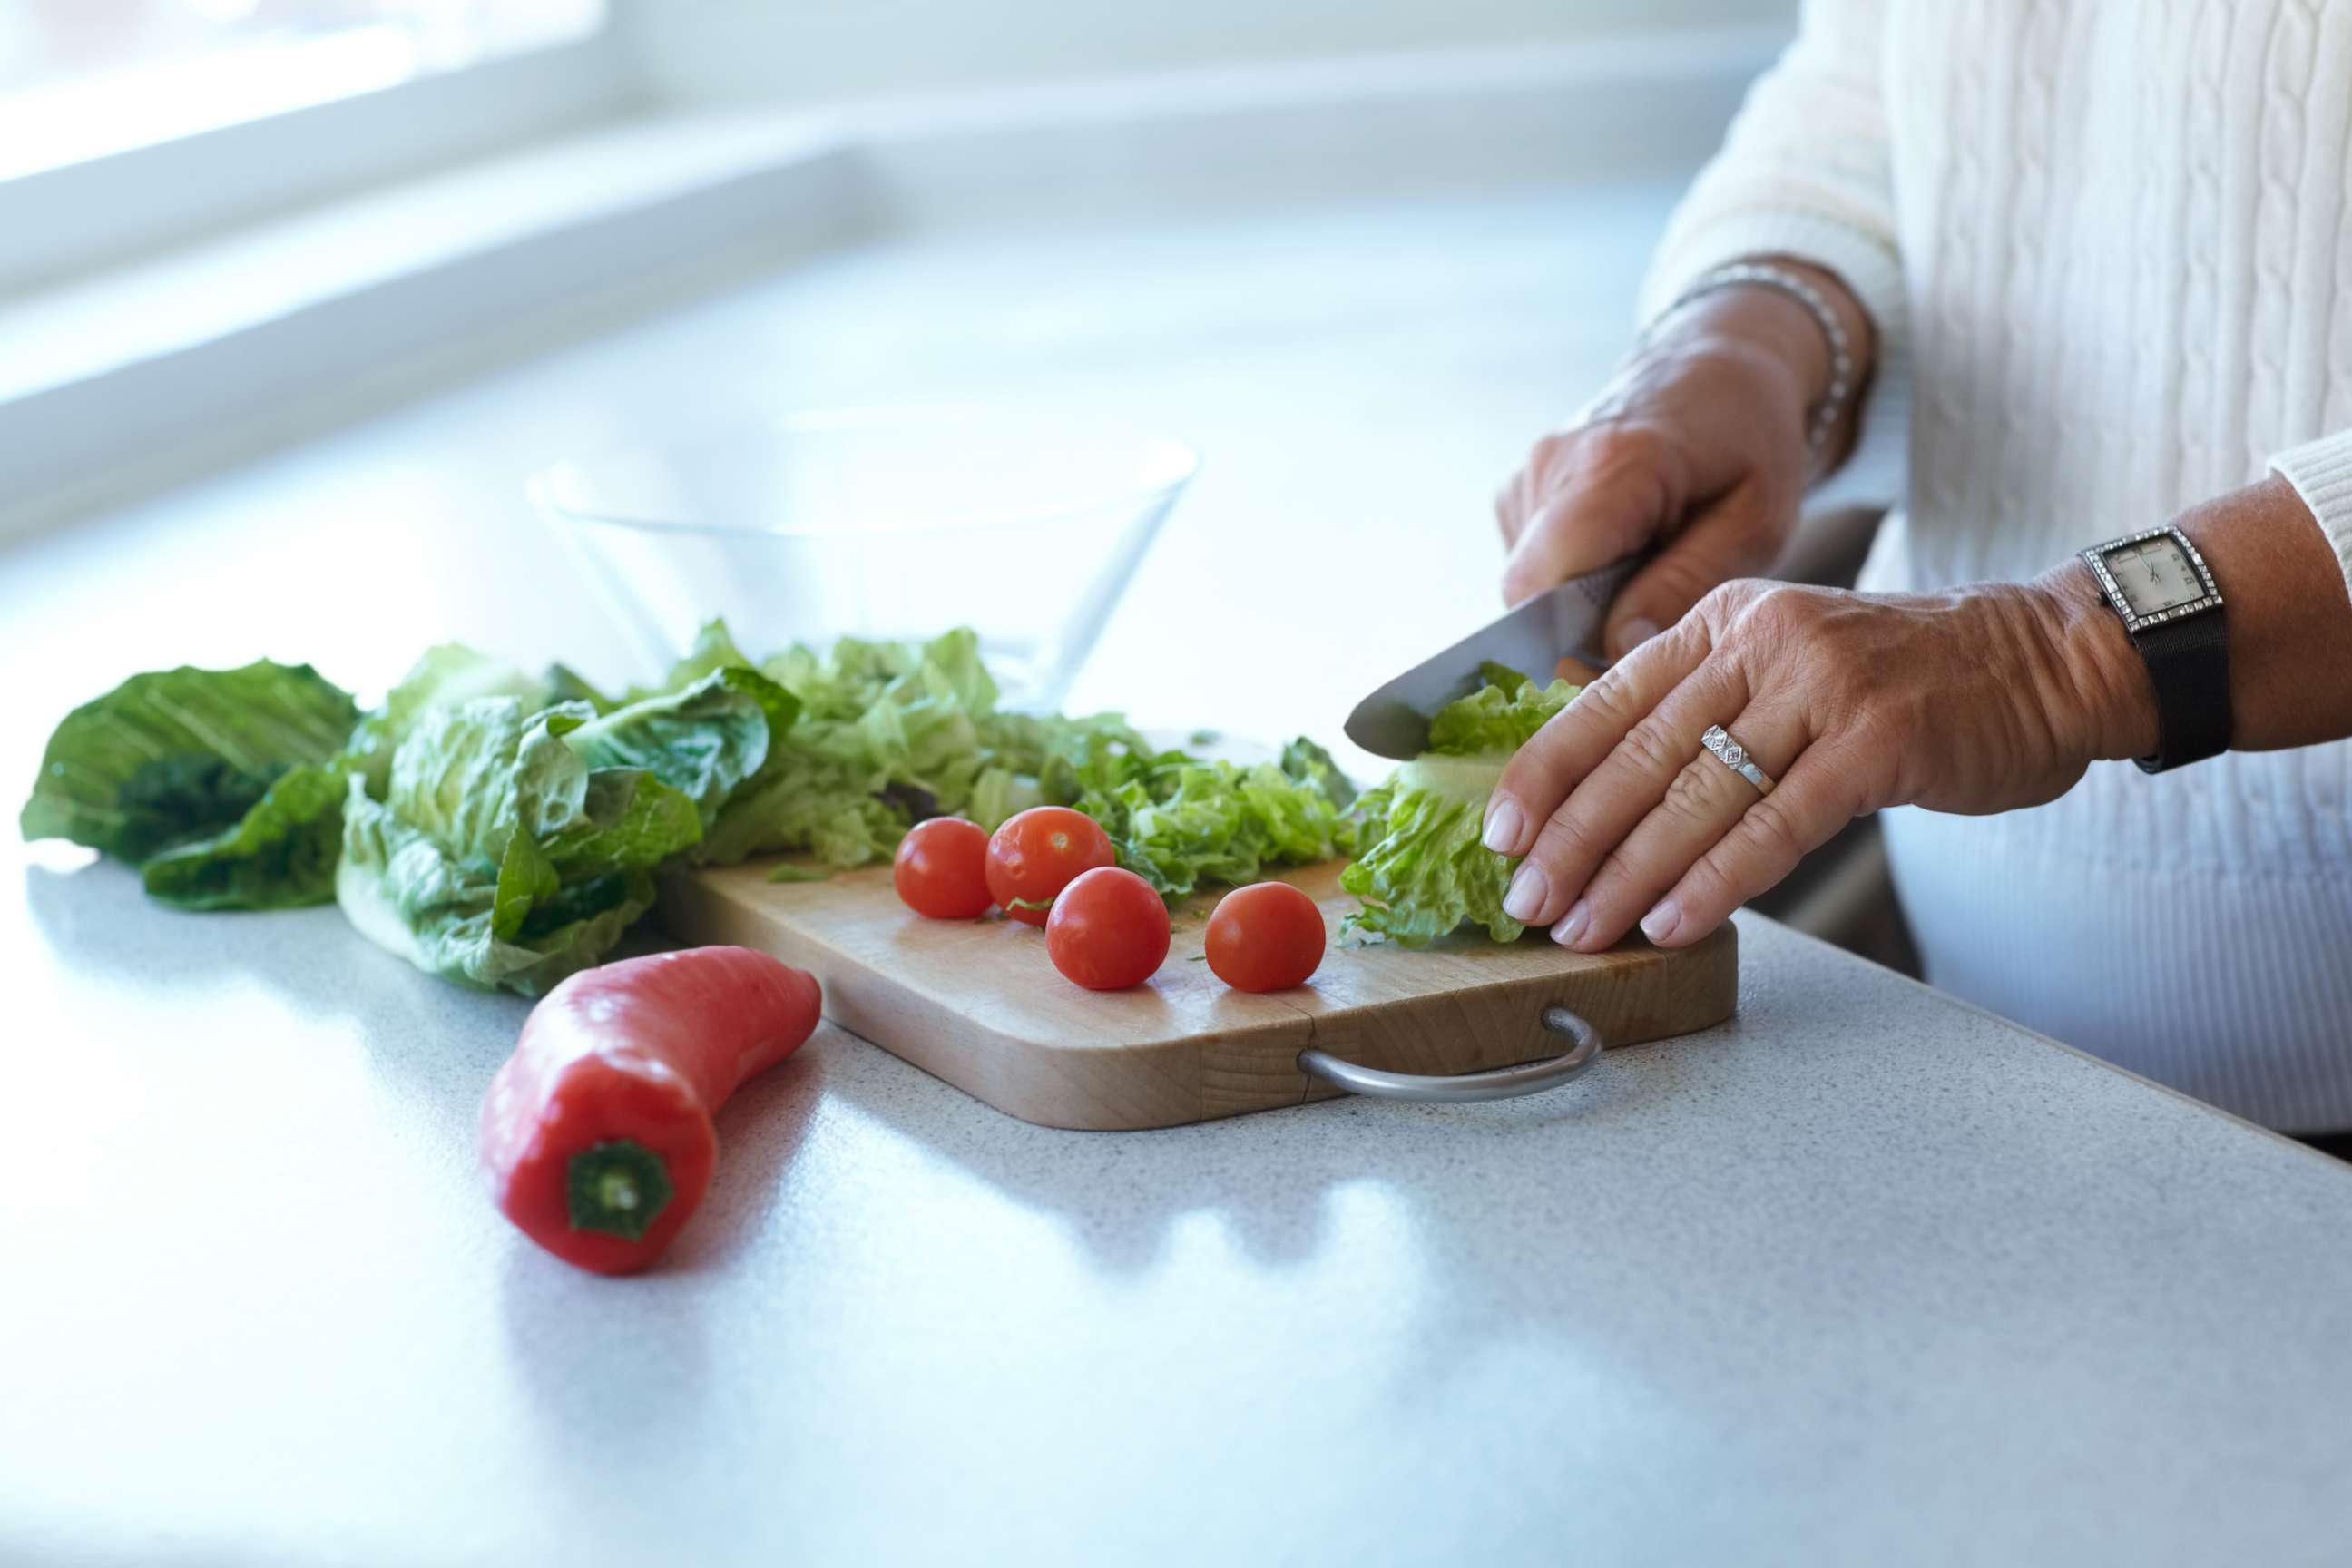 PHOTO: In this undated stock photo, a woman cuts up romaine lettuce on a cutting board for a salad.